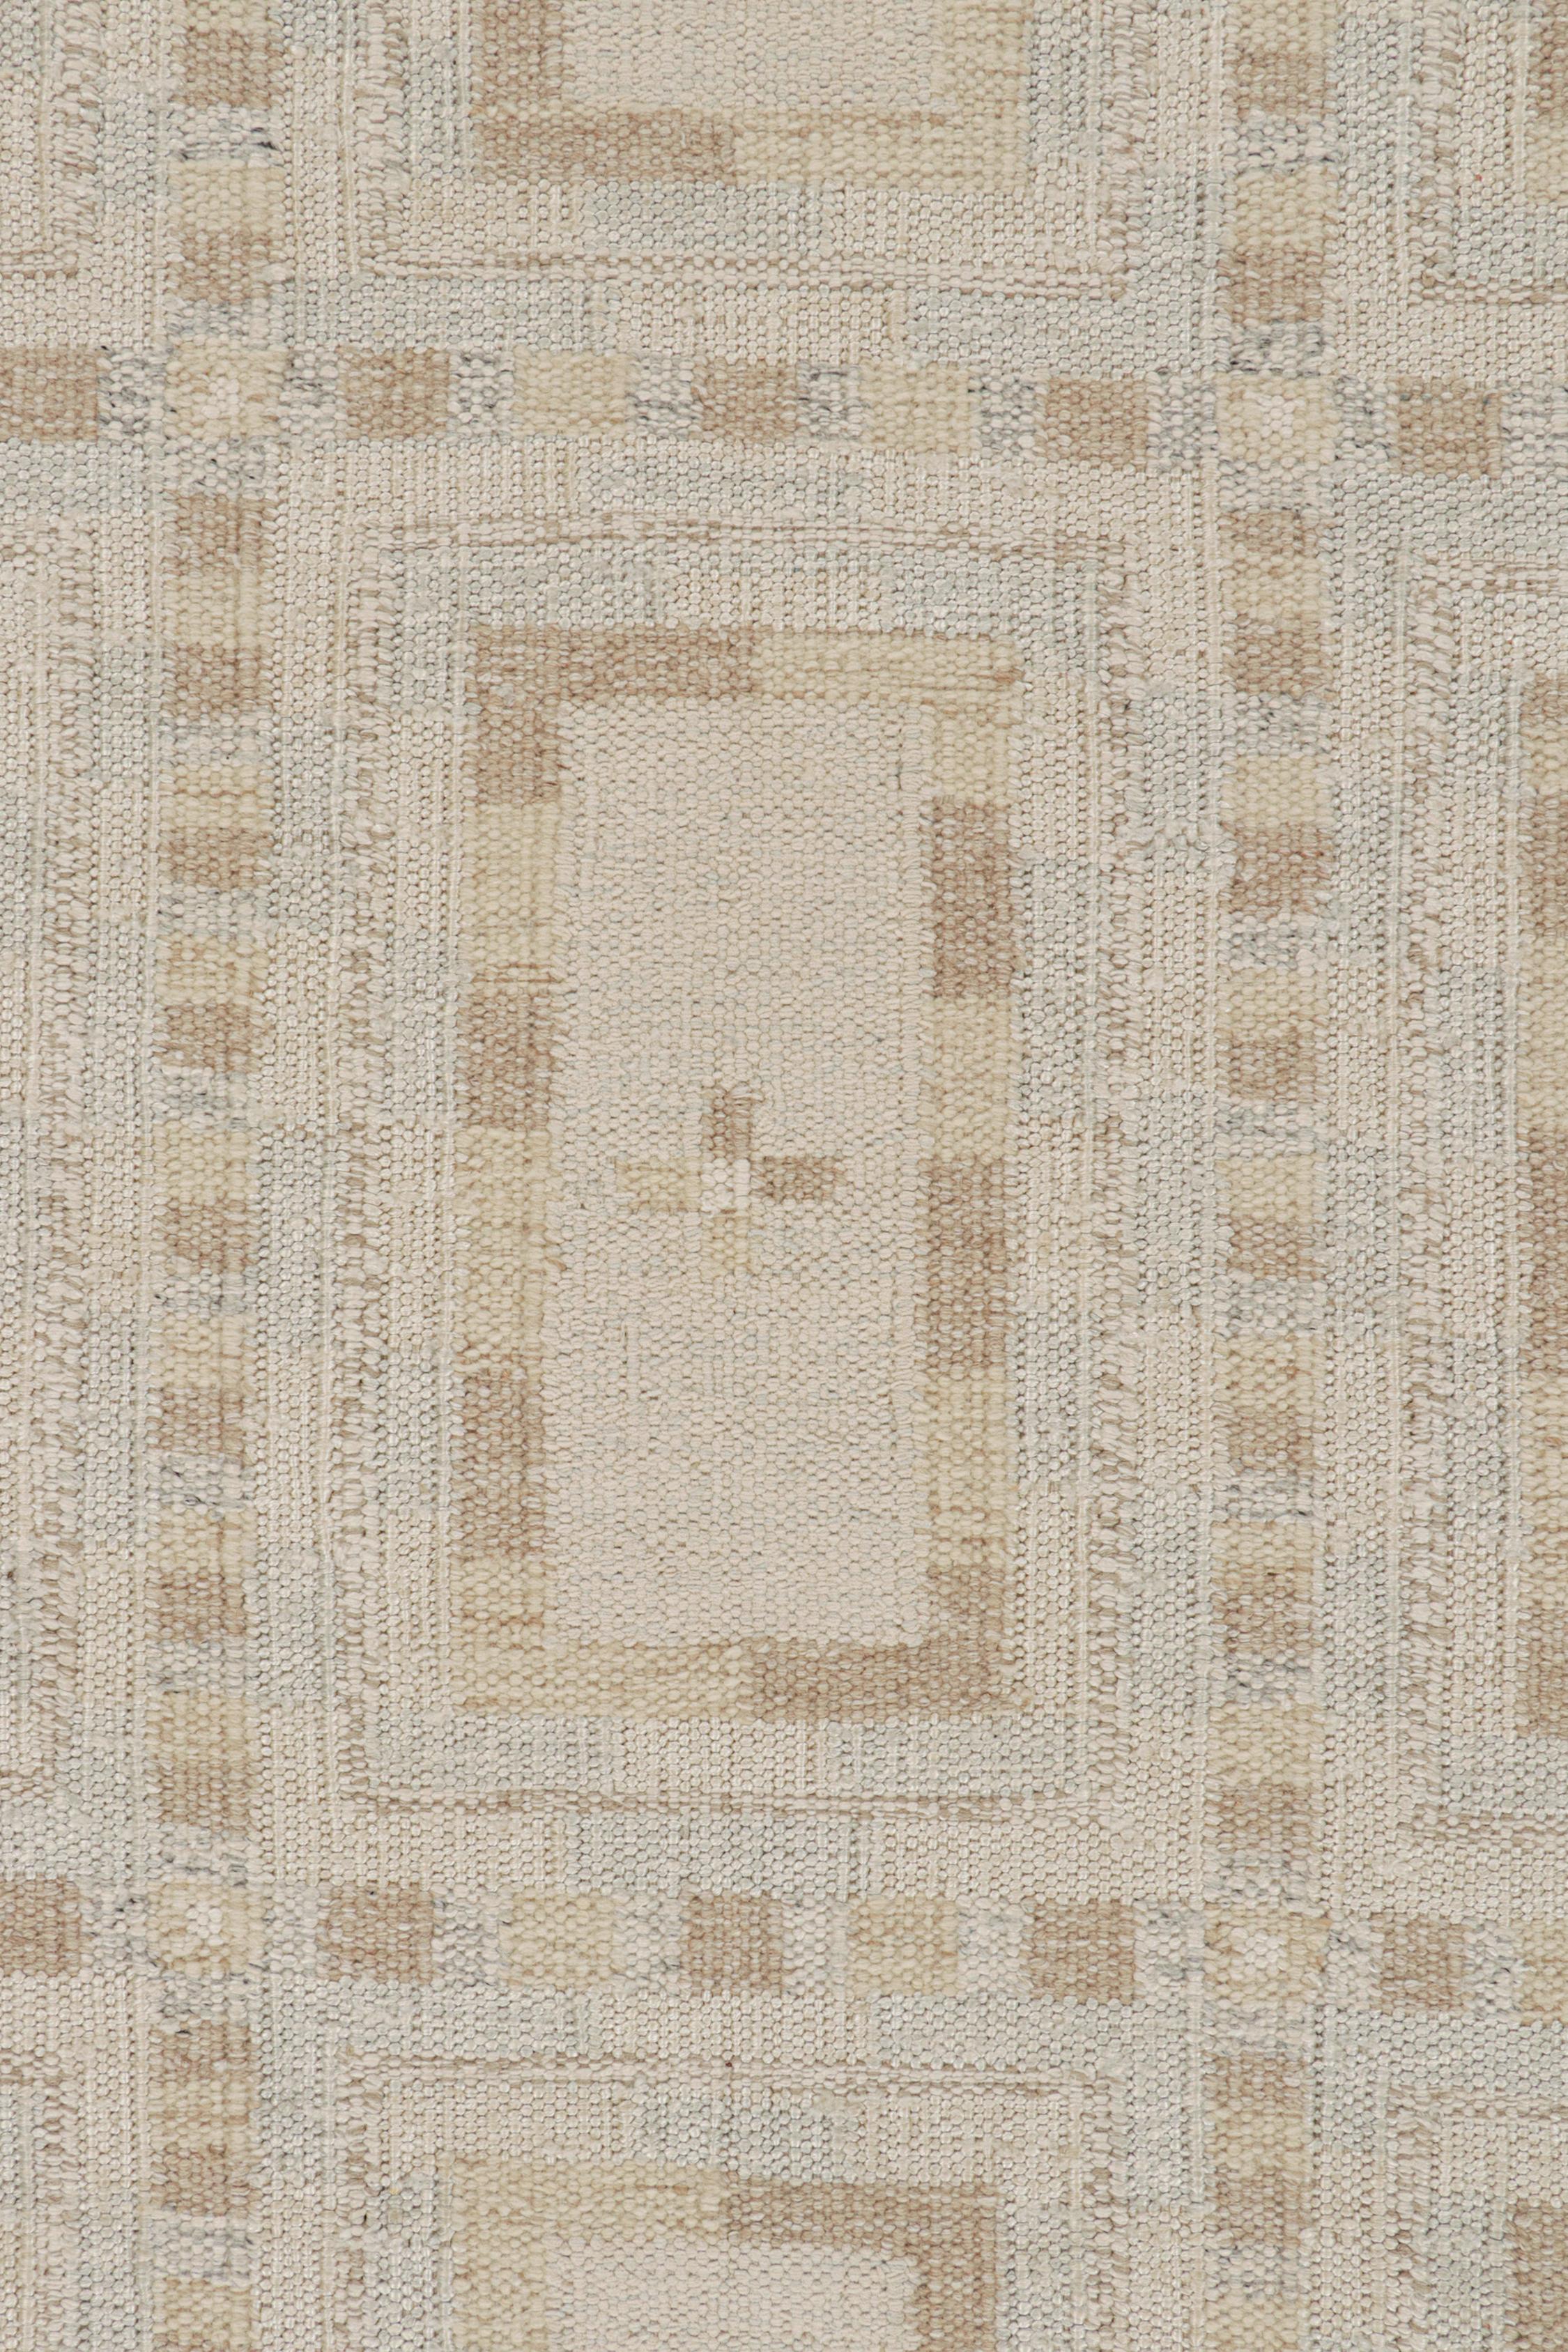 Rug & Kilim’s Scandinavian Style Kilim in White with Beige Geometric Patterns In New Condition For Sale In Long Island City, NY